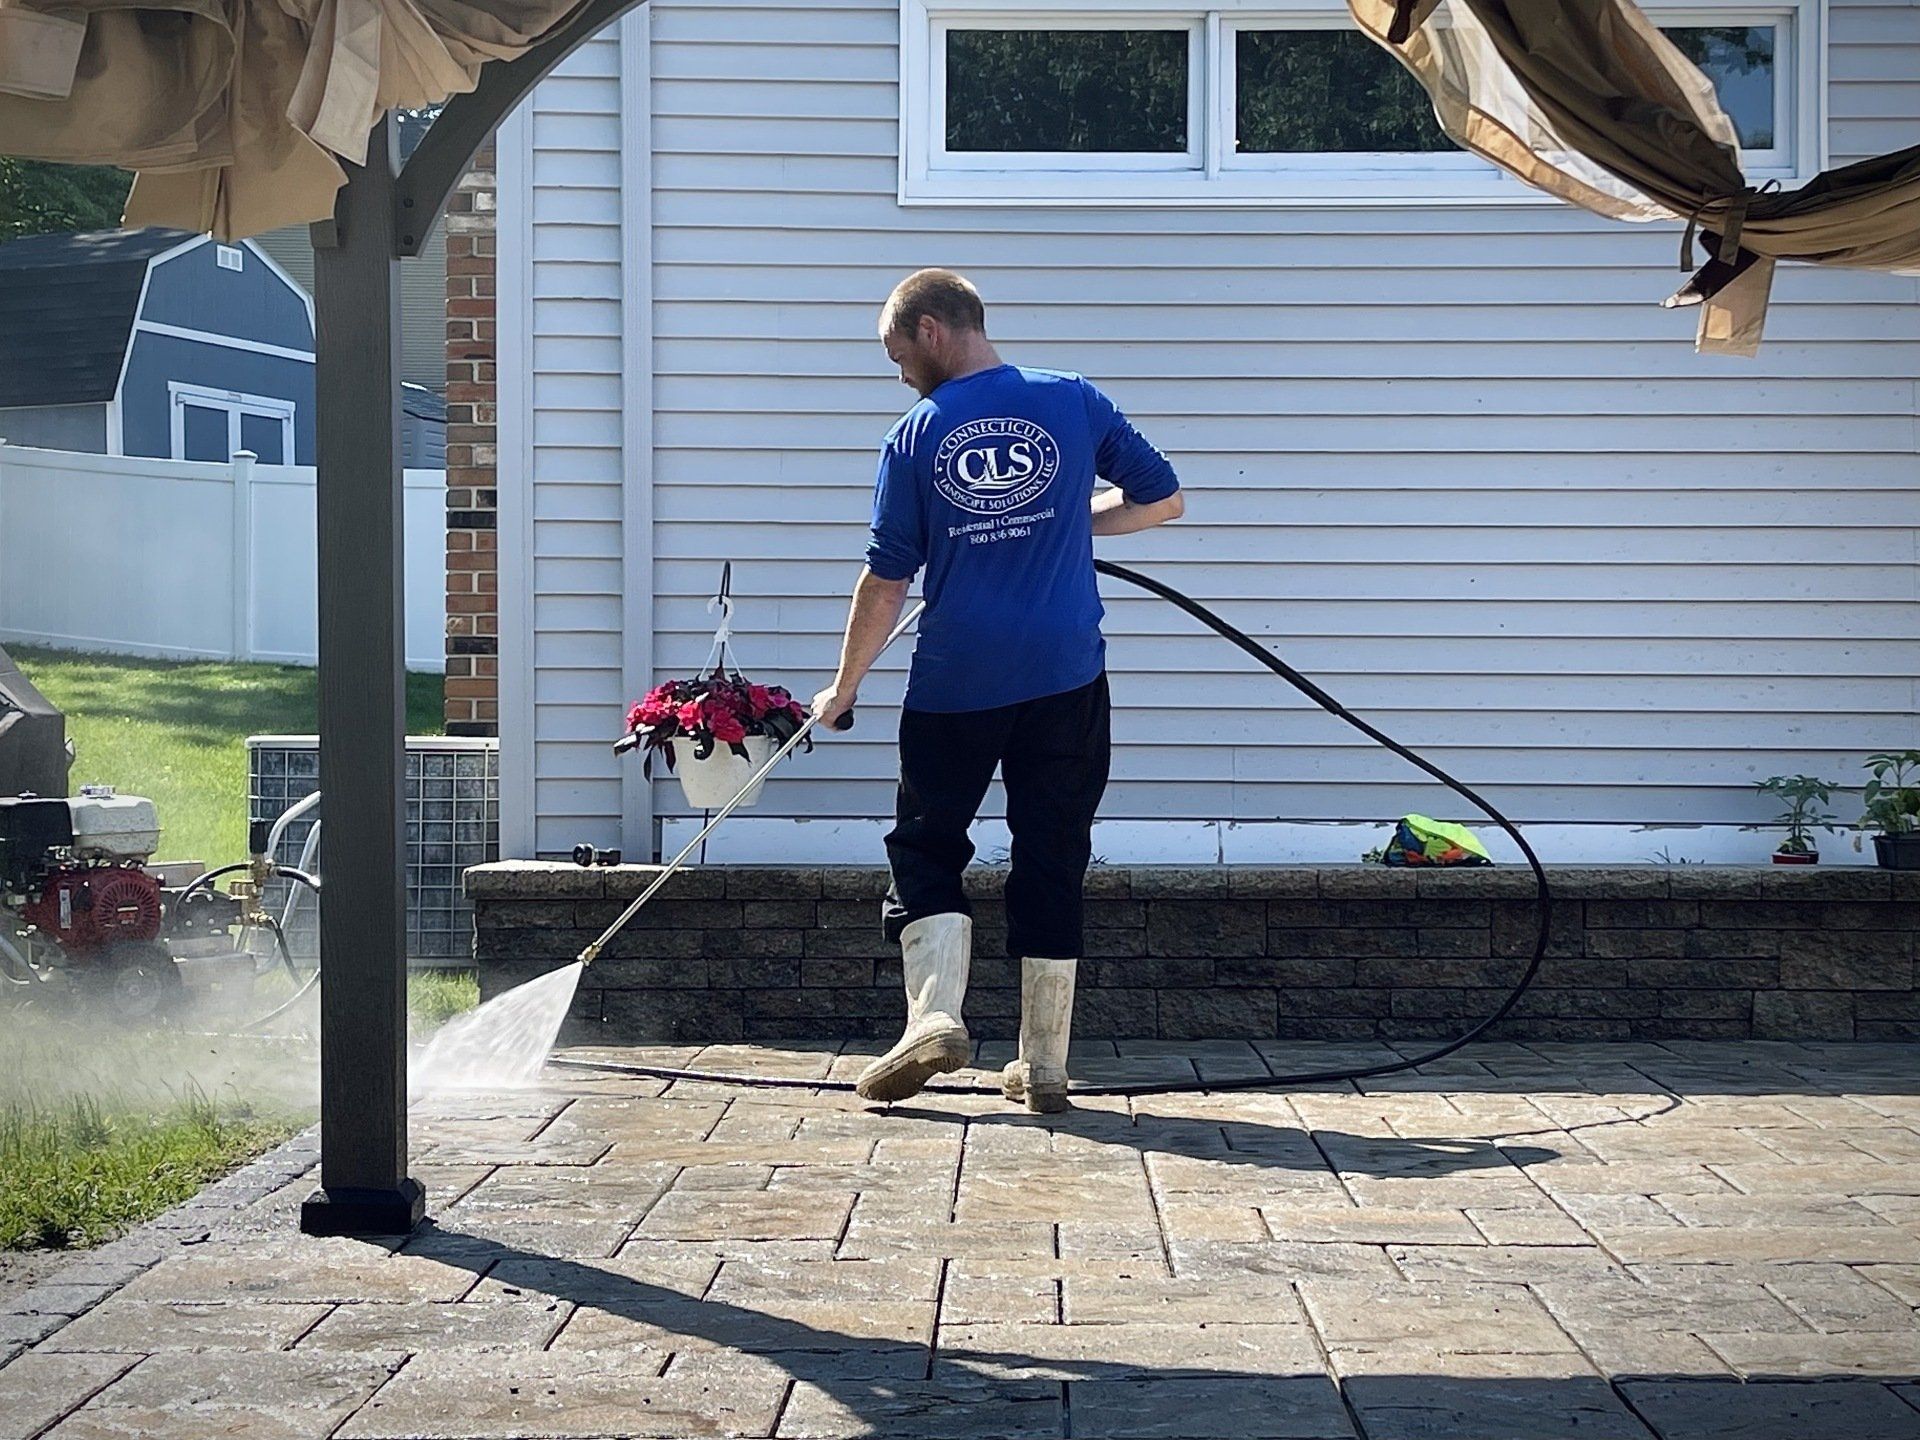 Power Washing Paver Patio in West Hartford CT Newington Connecticut